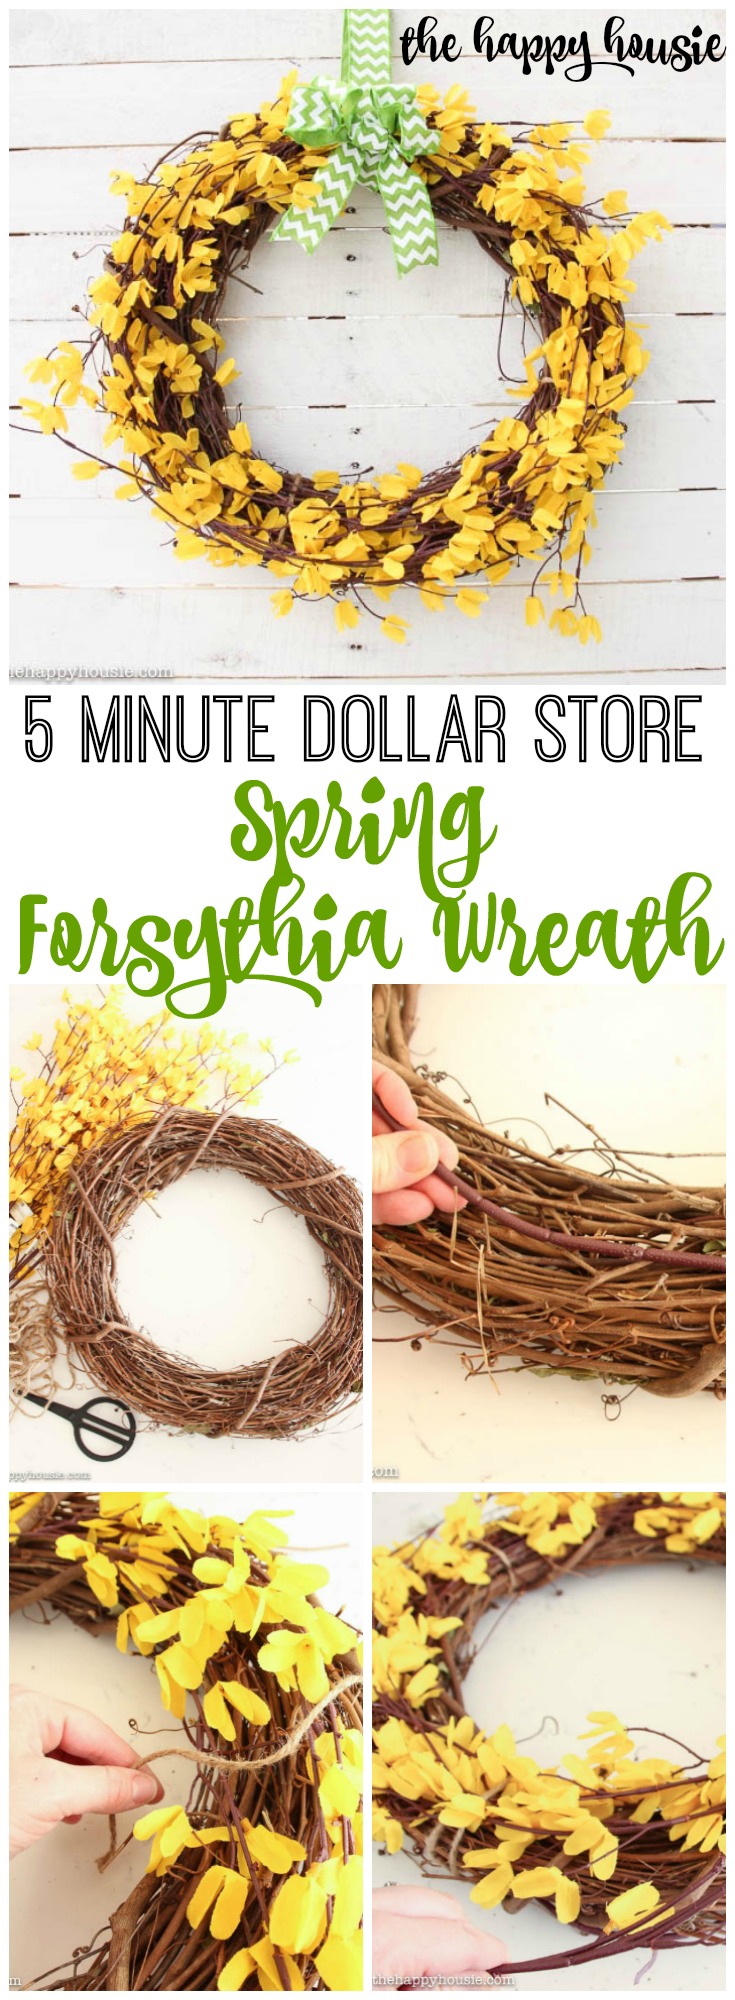 Five Minute Dollar Store DIY Spring Forsythia Wreath at the happy housie poster.